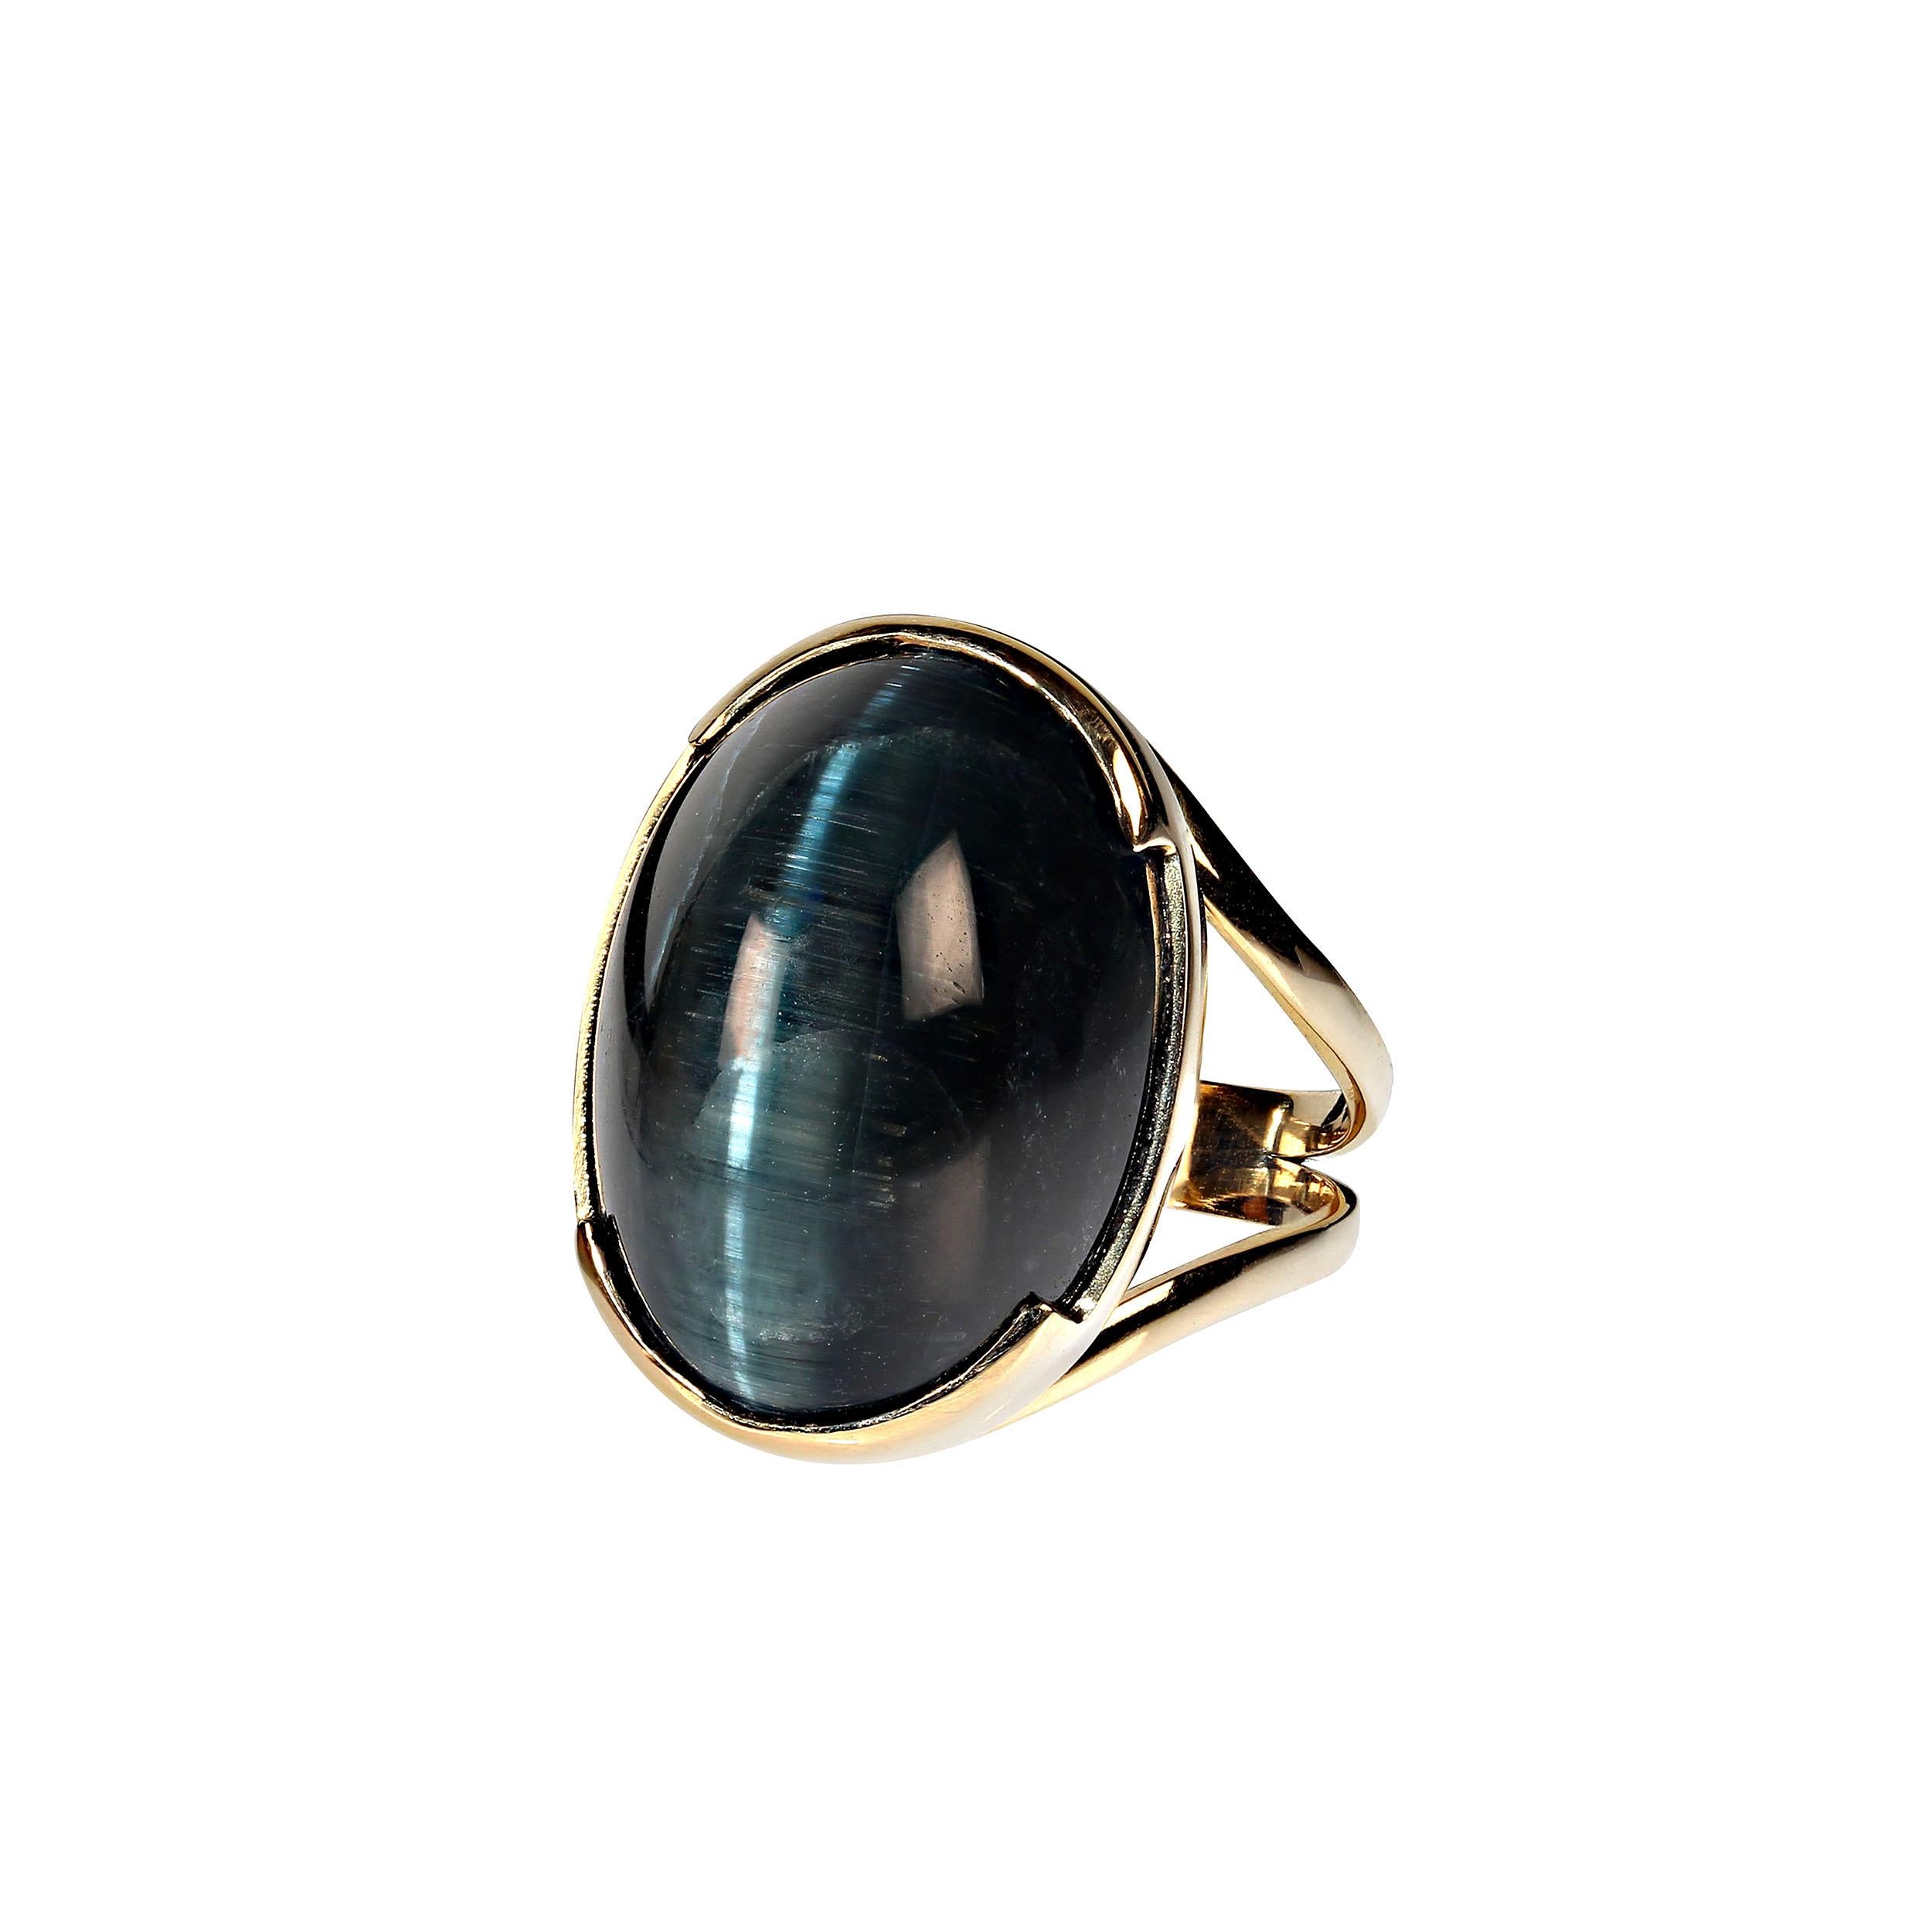 Cabochon AJD Magnificent 24 Carat Blue-Green Cat's Eye Tourmaline in 18KT Gold Ring For Sale